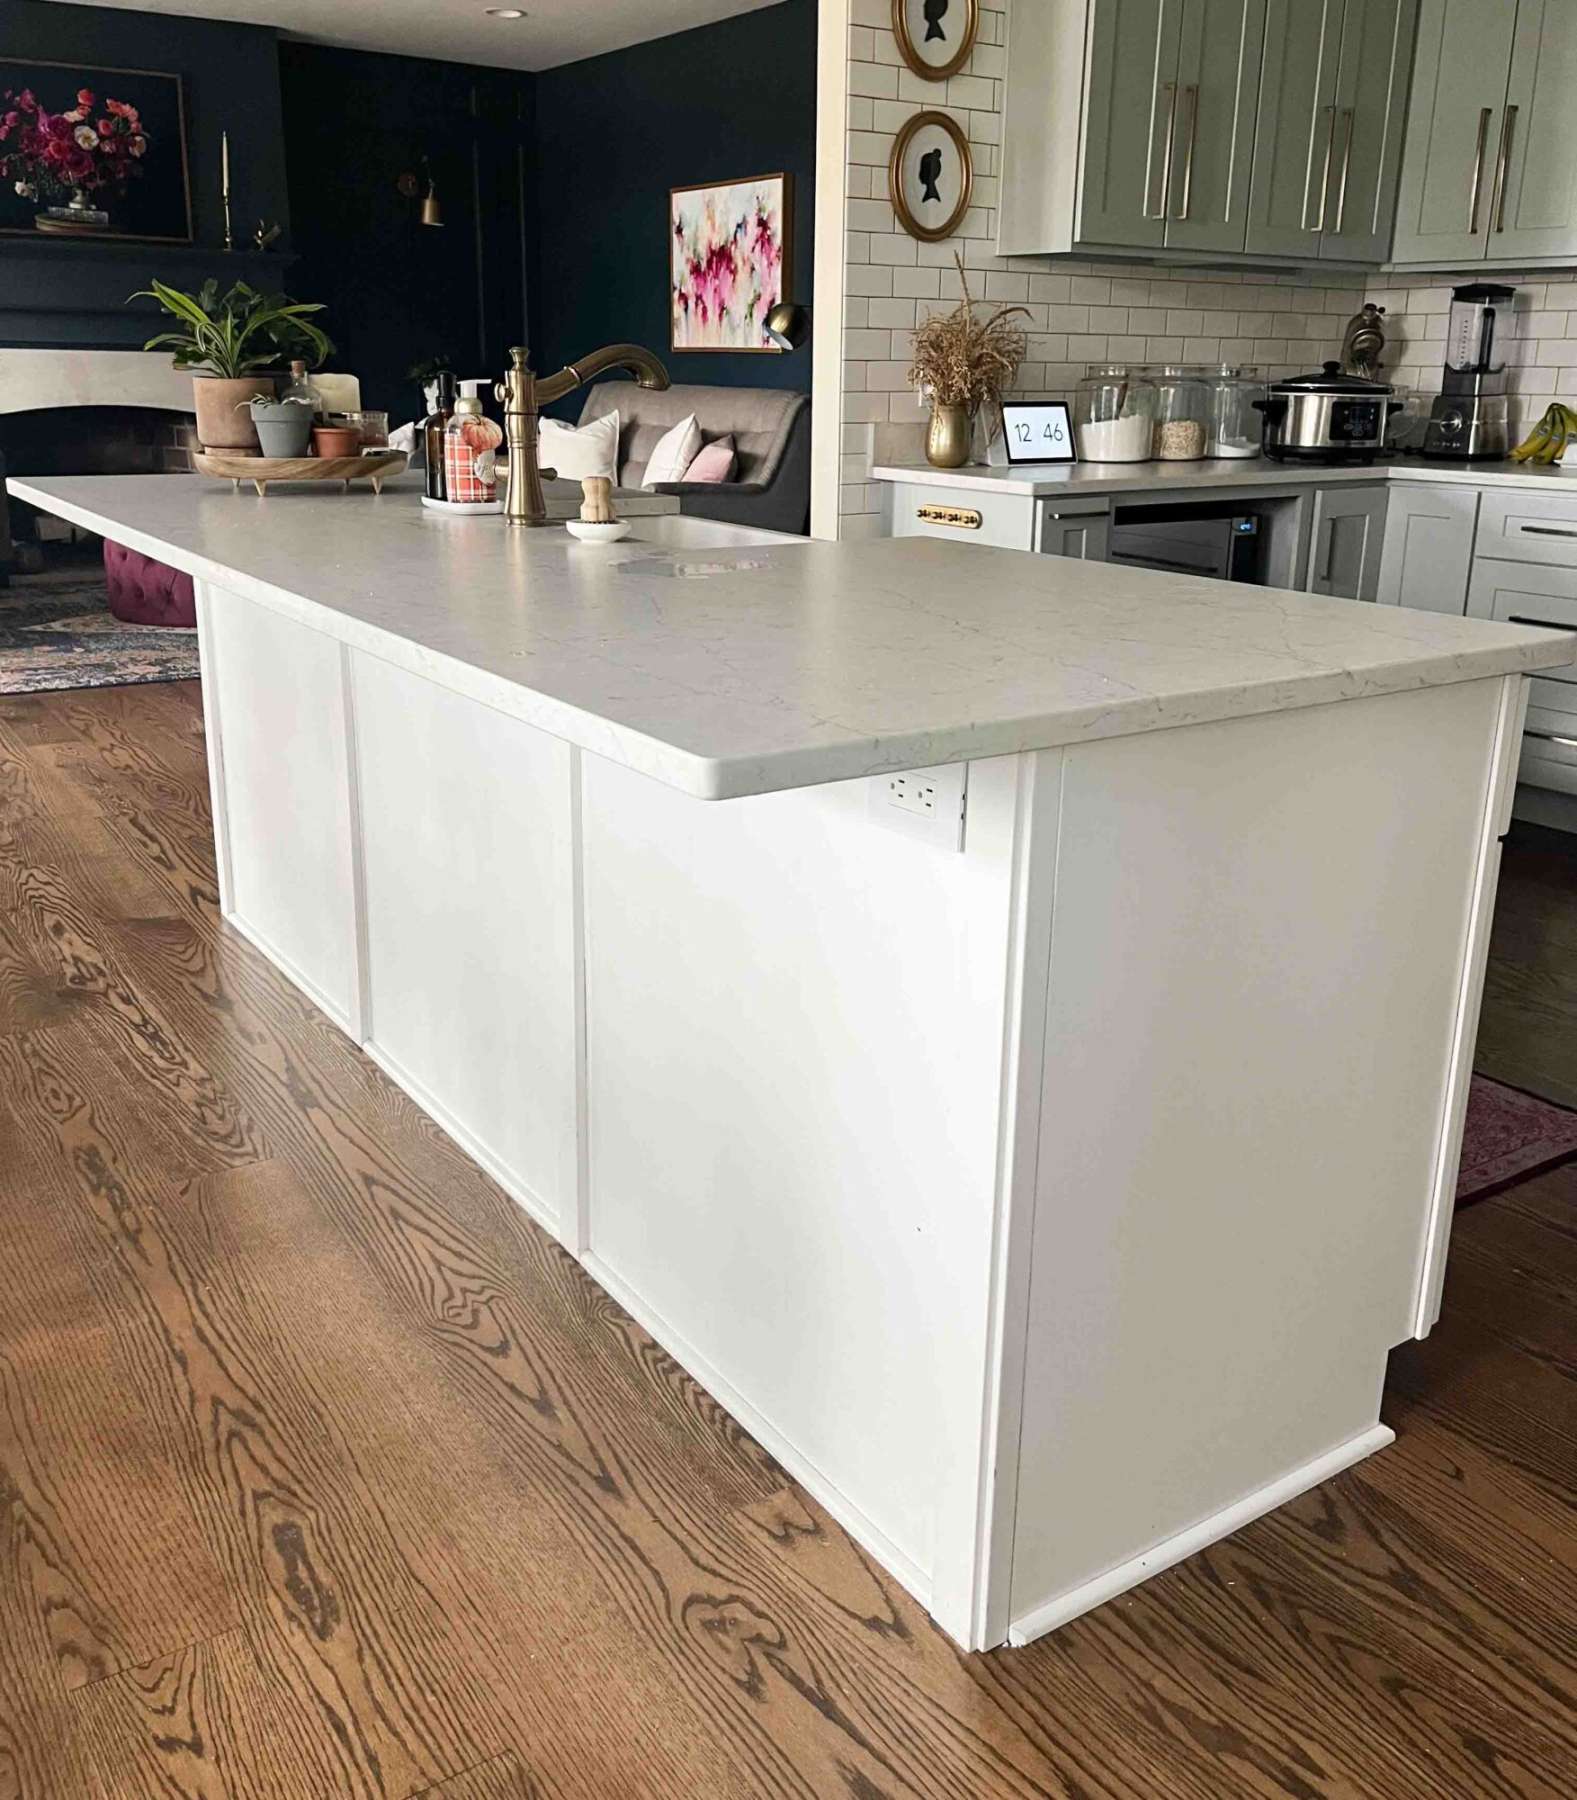 Adding Molding to a Kitchen Island - Sincerely, Sara D